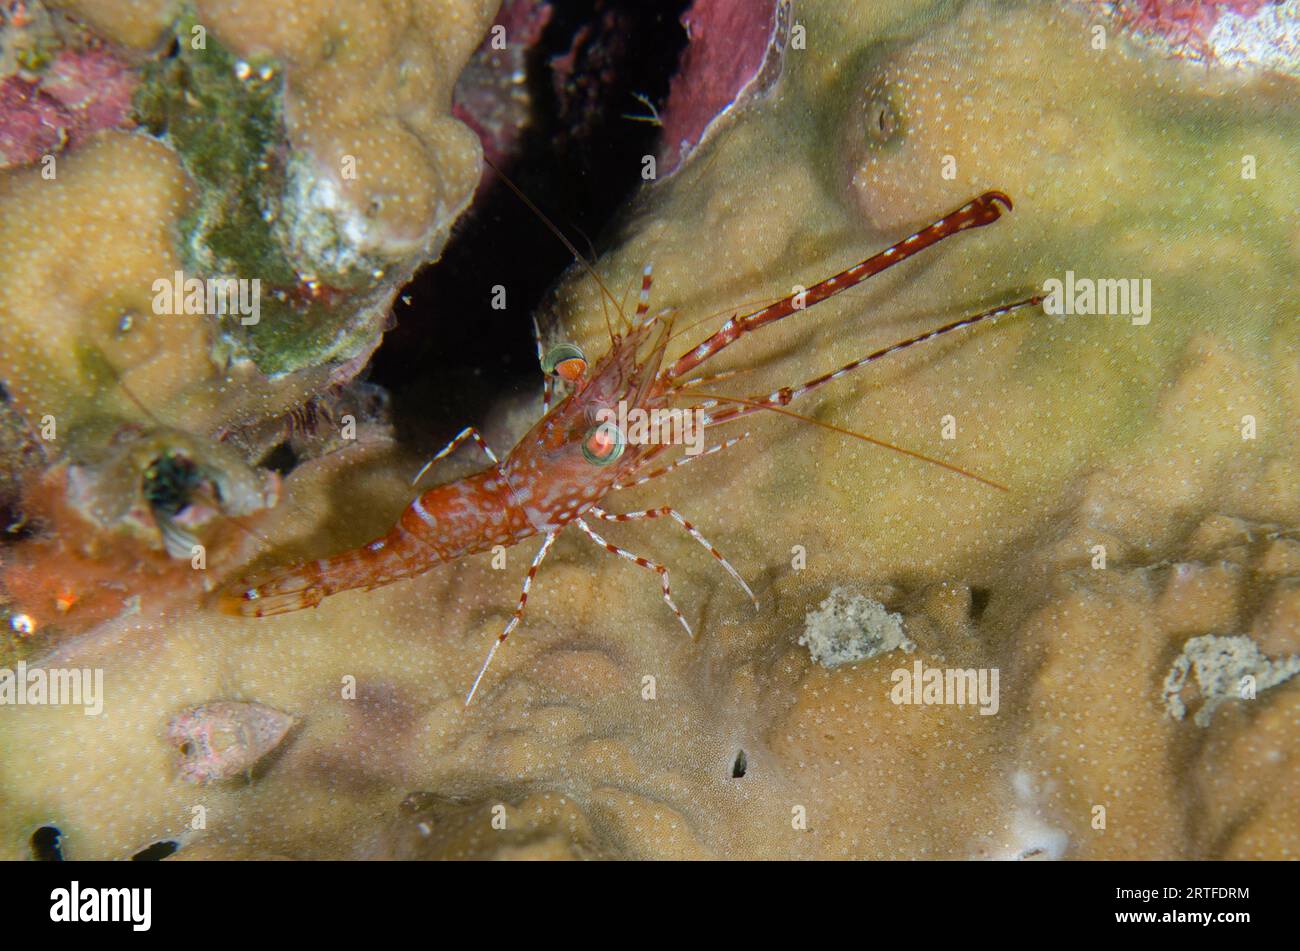 Reticulated Hinge-beak Shrimp, Cinetorhynchus reticulatus, with long claws on Hard Coral, Scleractinia Order, night dive, Mimpi Channel Jetty dive sit Stock Photo